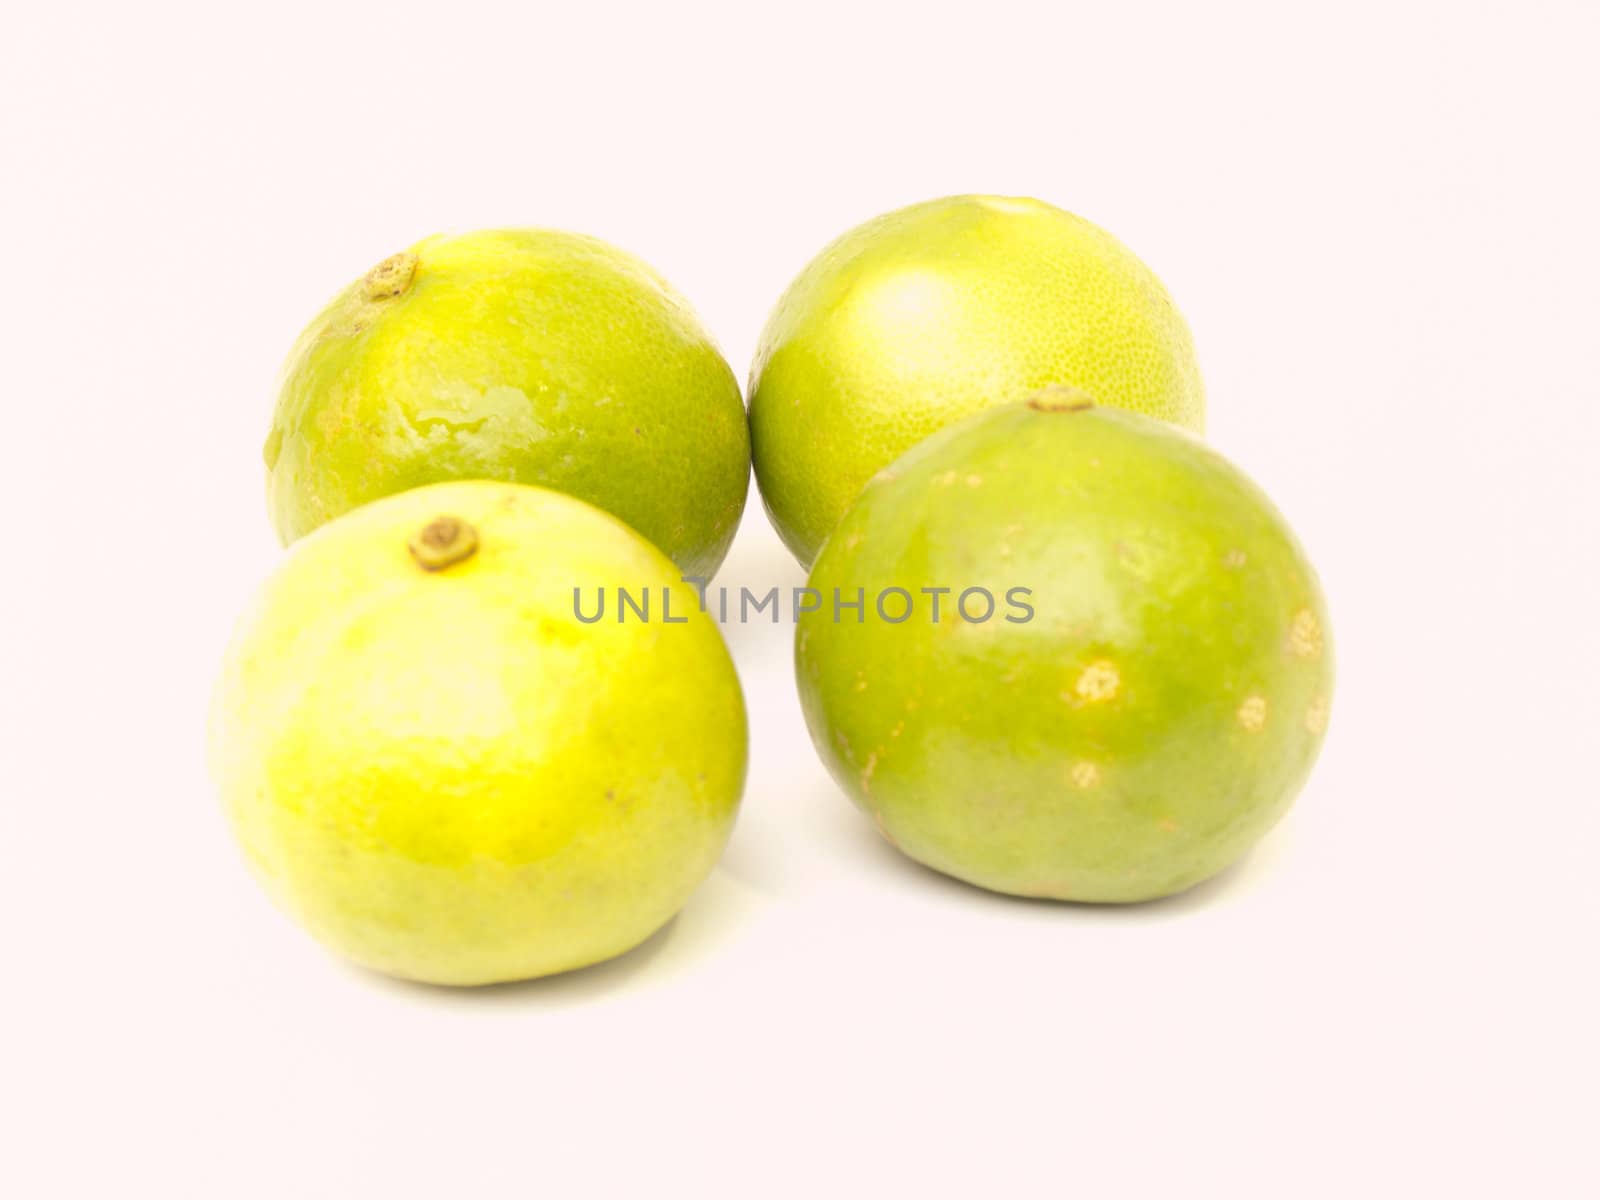 Limes isolated on white background